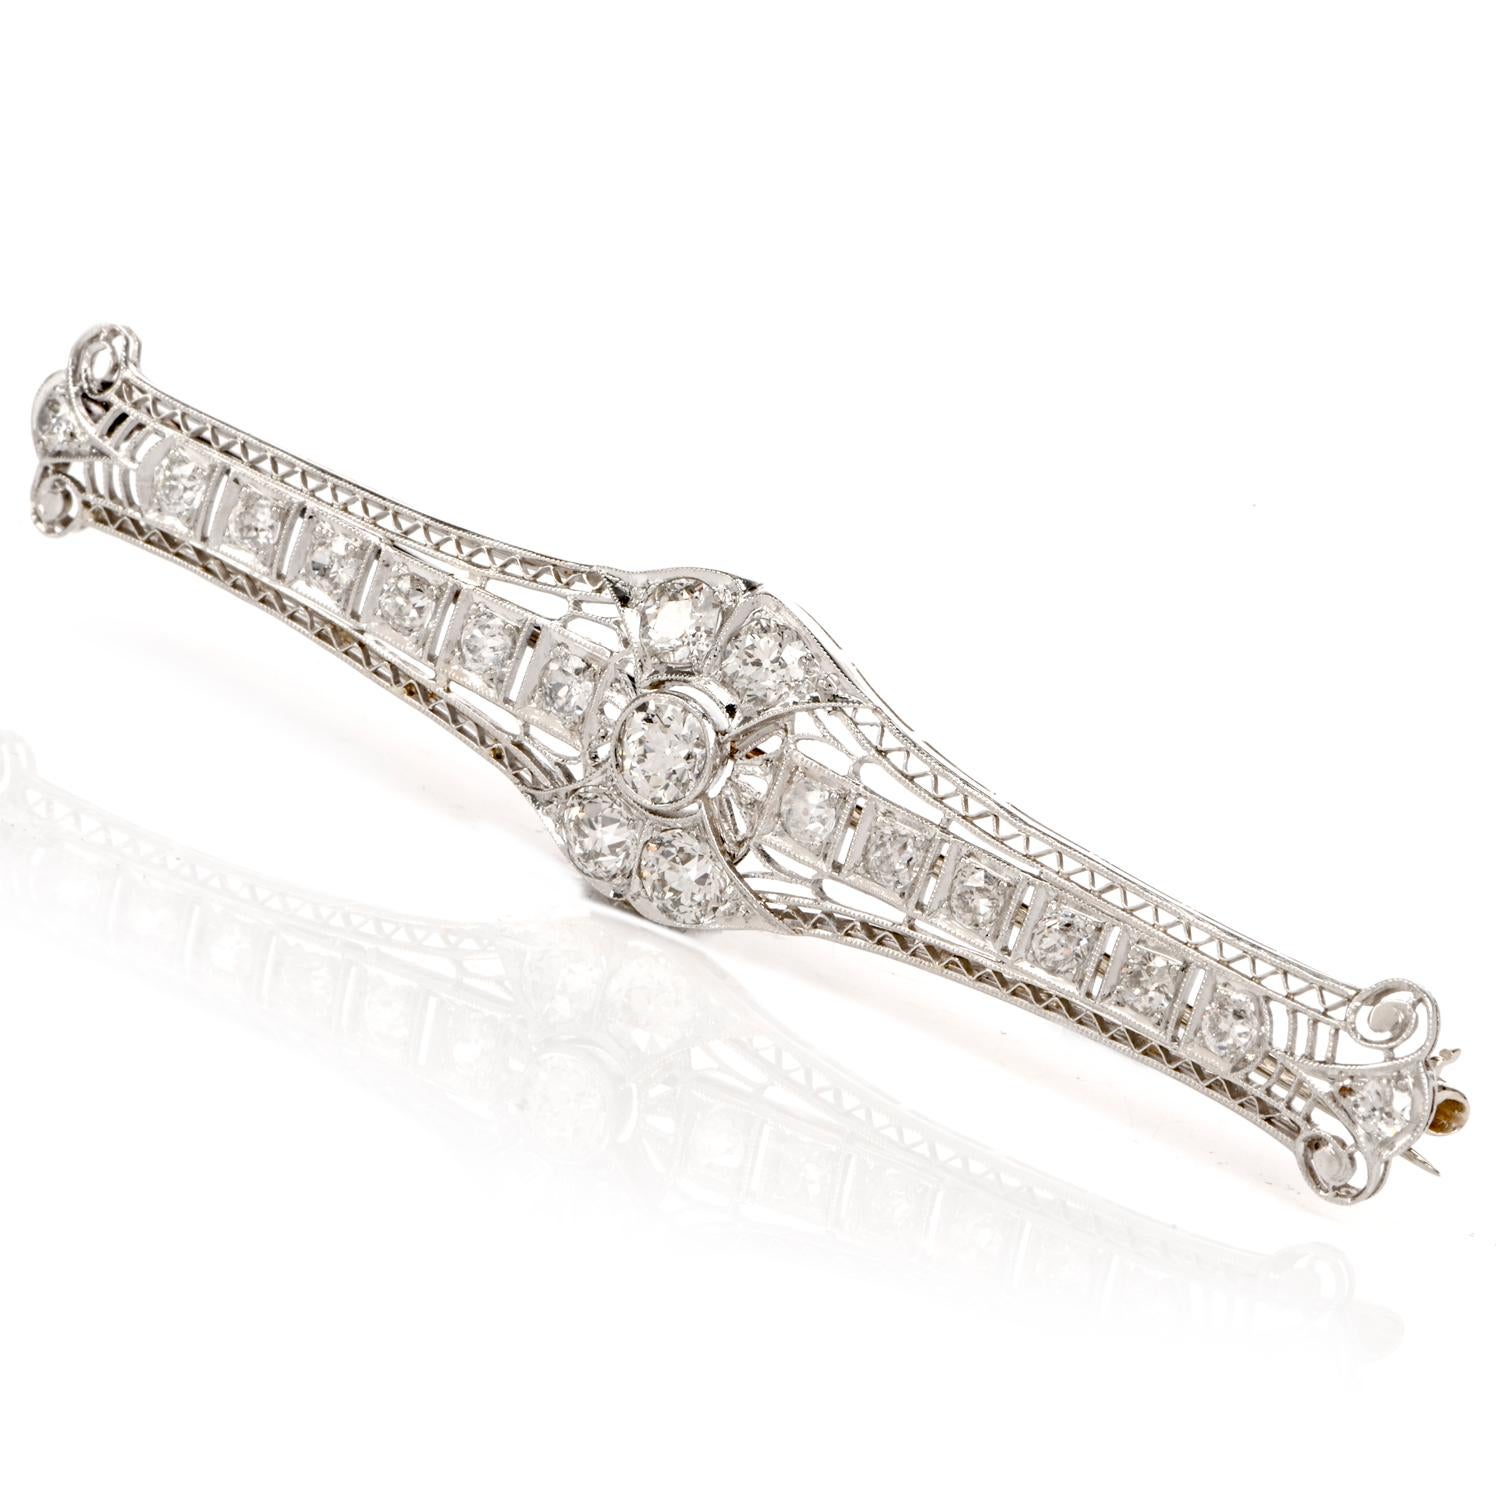 This captivating early Art deco bar pin brooch is handcrafted in platinum, weighing 9.4 grams and measuring 3 inches long and 15 mm wide. Composed of Art Deco geometric features, this stunning pin brooch is adorned with five large European round